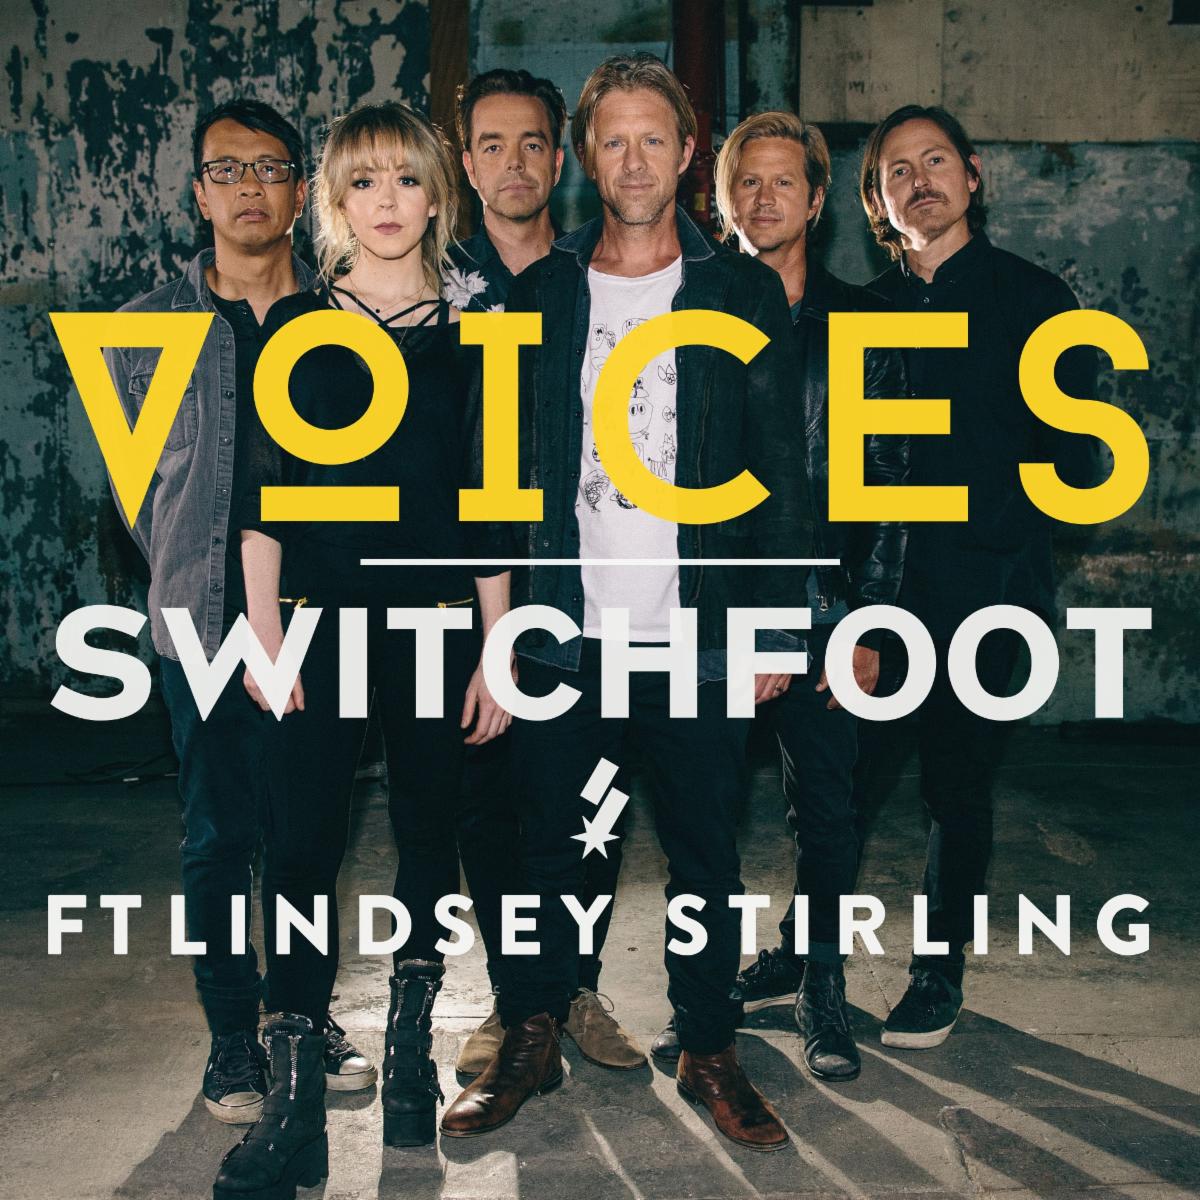 SWITCHFOOT Shares New Single "VOICES" Featuring Famed Electronic Violinist Lindsey Stirling